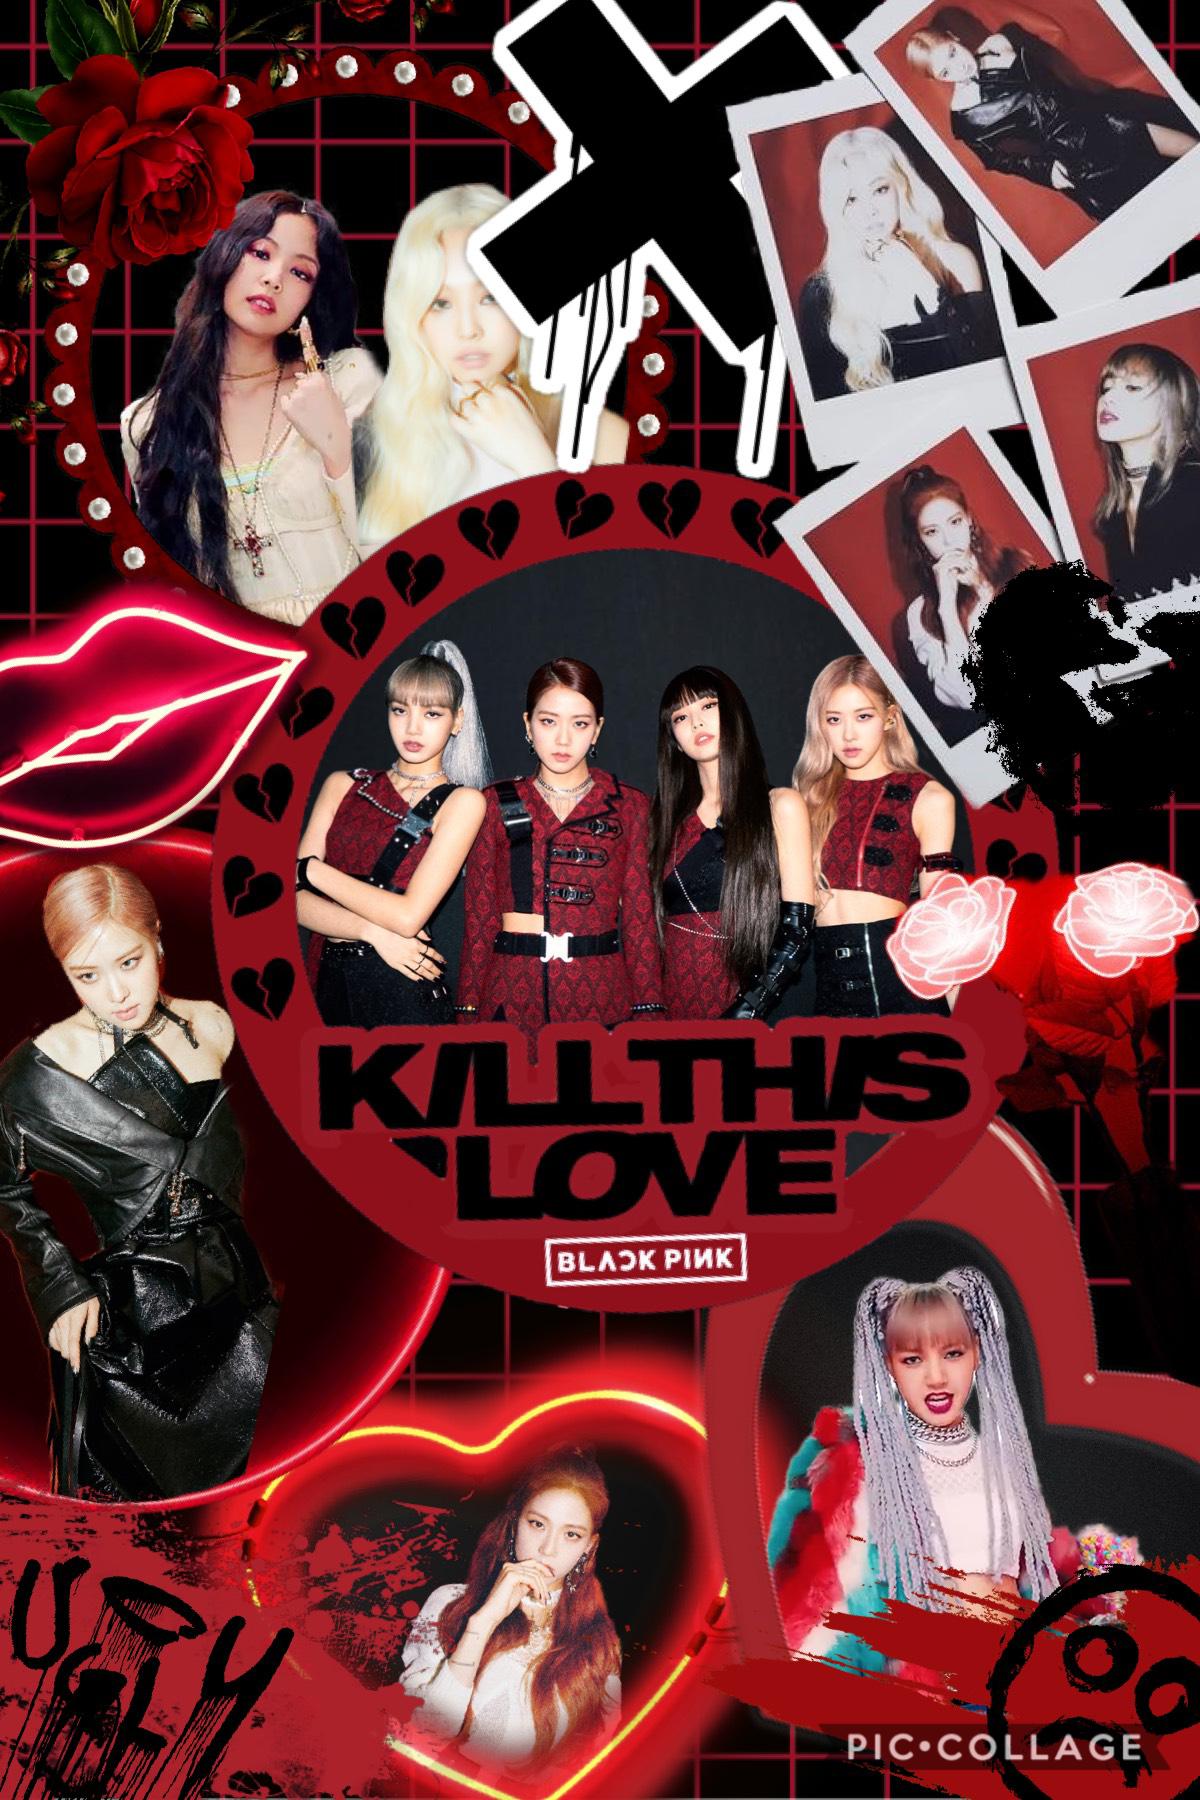 ☆*C L I C K*☆
So...it’s been like over a year since I used PicCollage and I’m not that good at collages anyway so don’t expect anything great.

Anyway, I made this because why not? Stan Blackpink cowards.